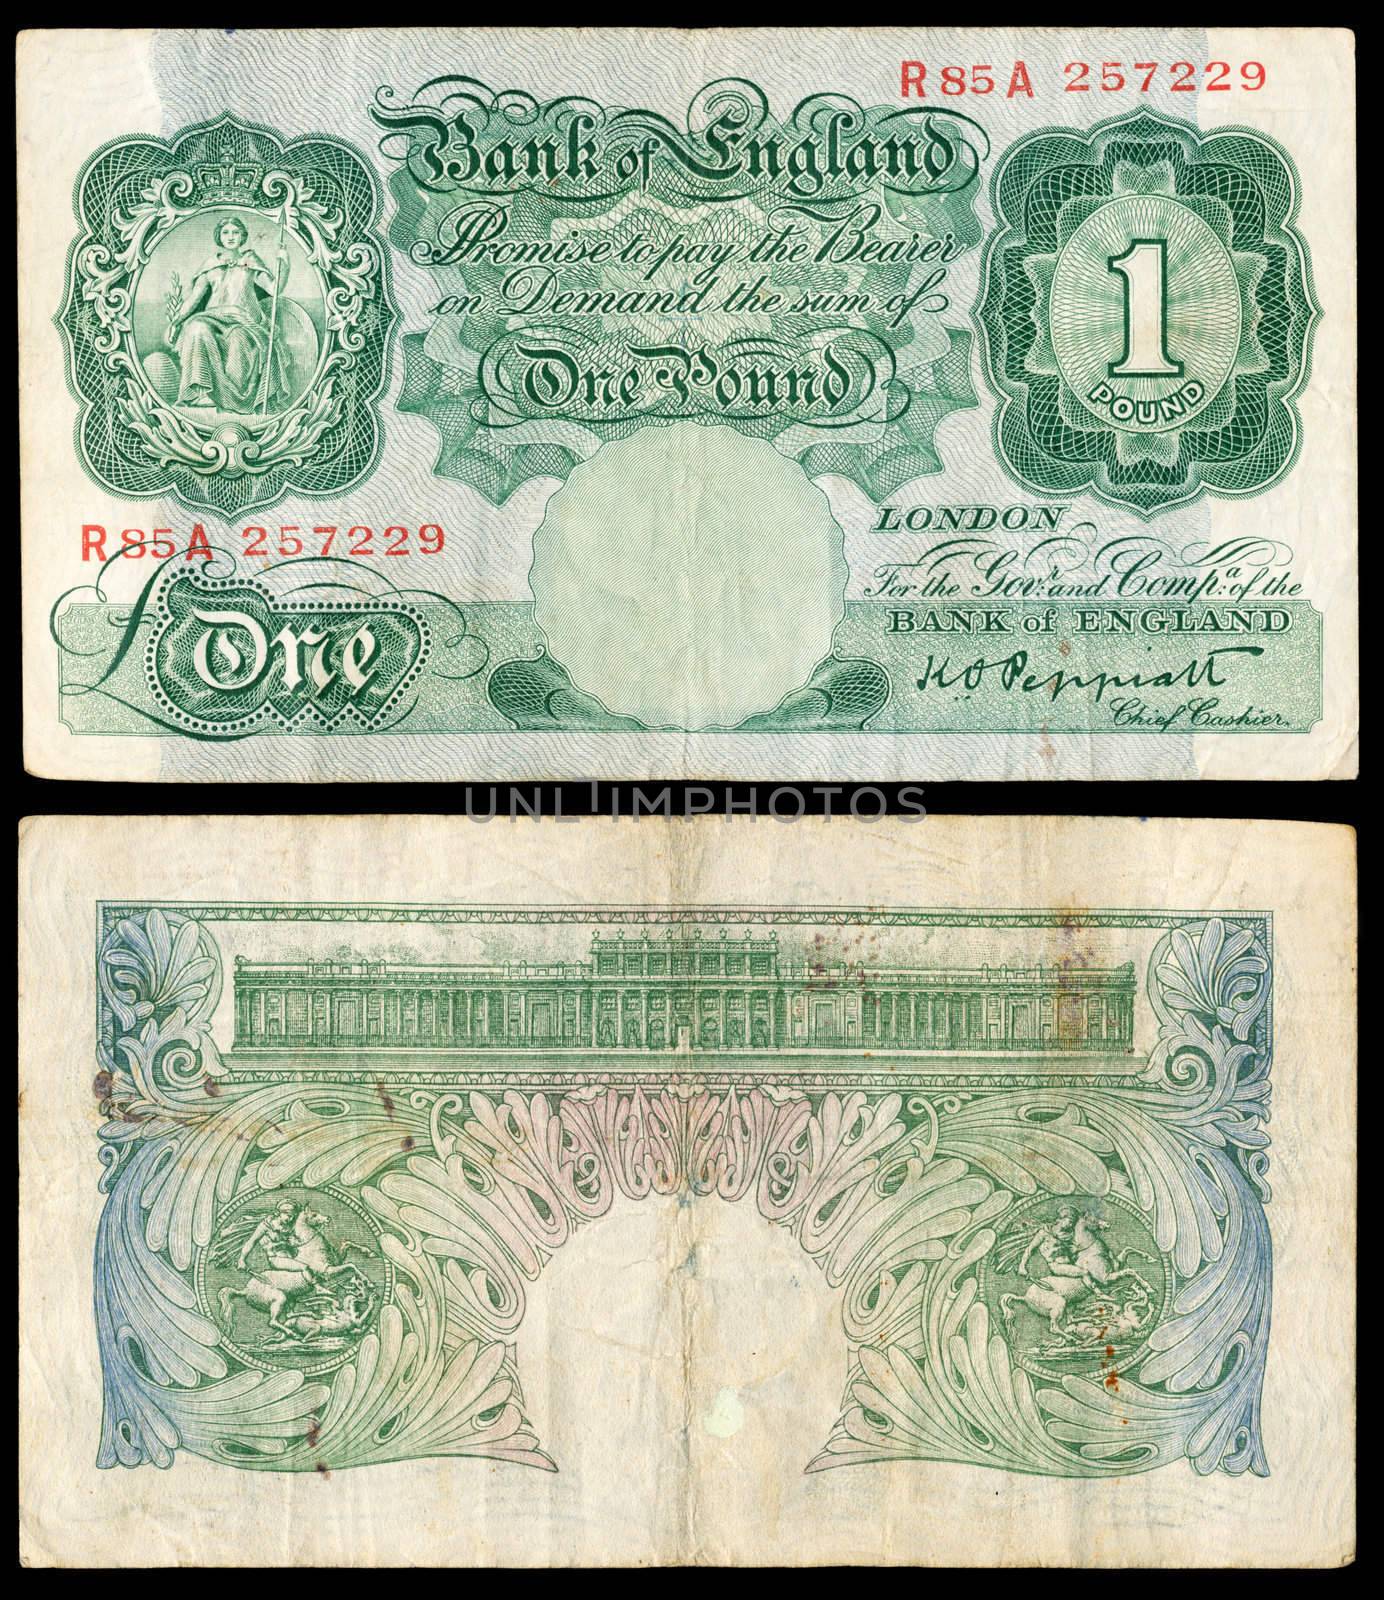 High resolution scan of an old Bank of England pound note